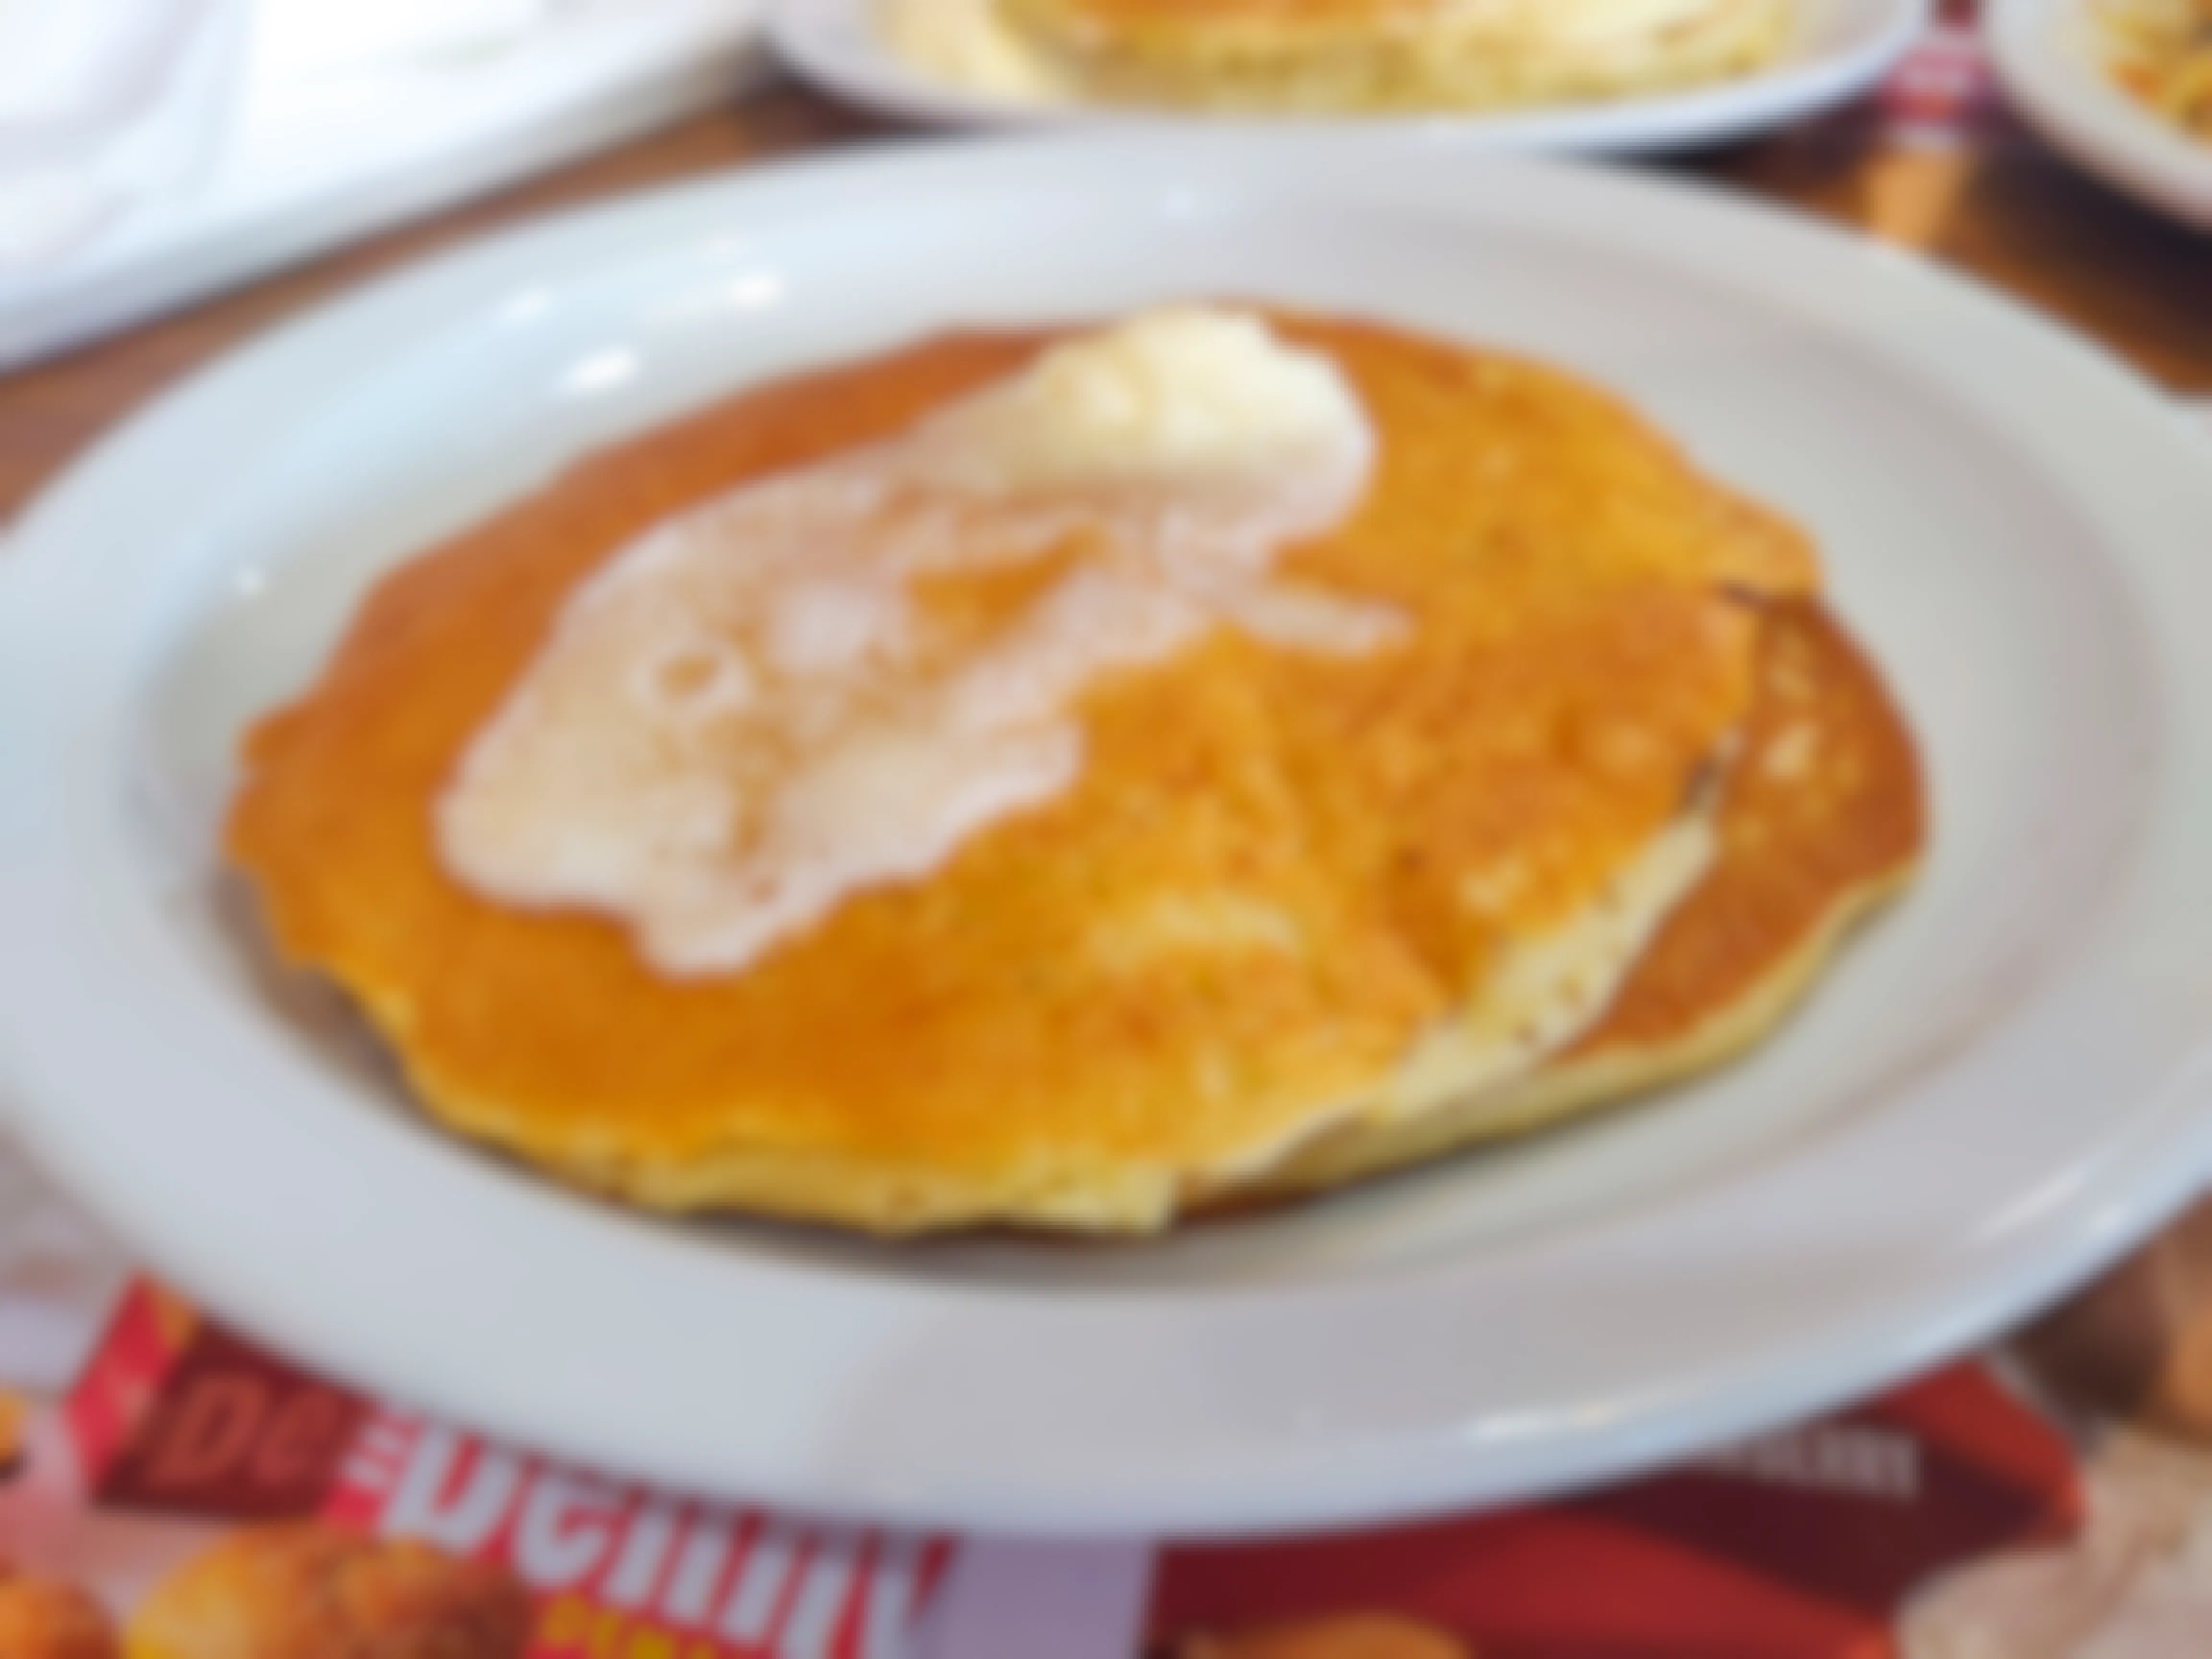 A plate of two plain pancakes with butter on top, sitting on a table at Denny's.